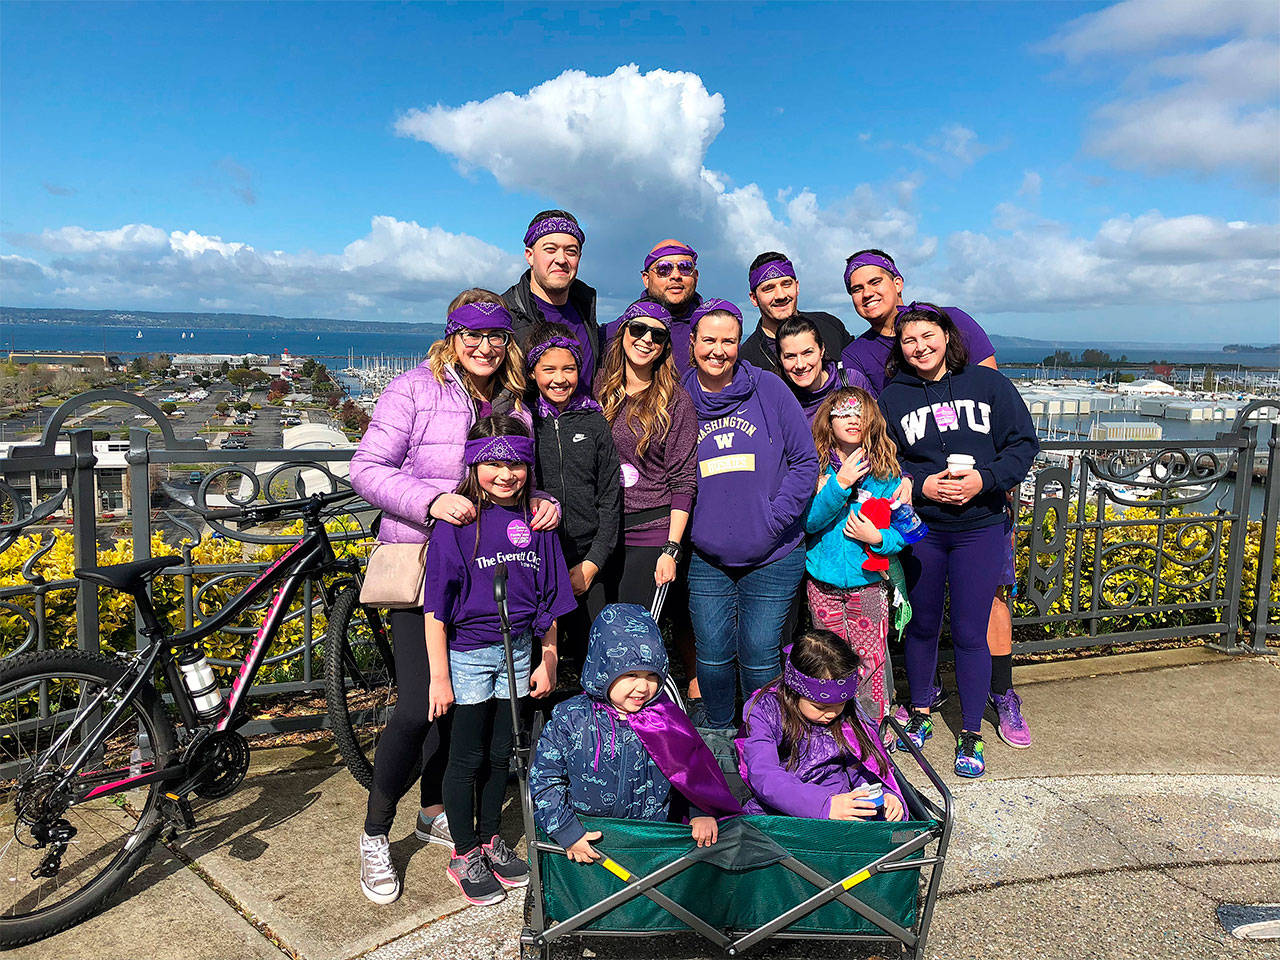 Dominic Gonzalez, 3, of Everett, in wagon on left, assembles his team as Ambassador of the 2018 March of Dimes Snohomish County March for Babies fundraising walk held April 21 in Everett. (Contributed photo)